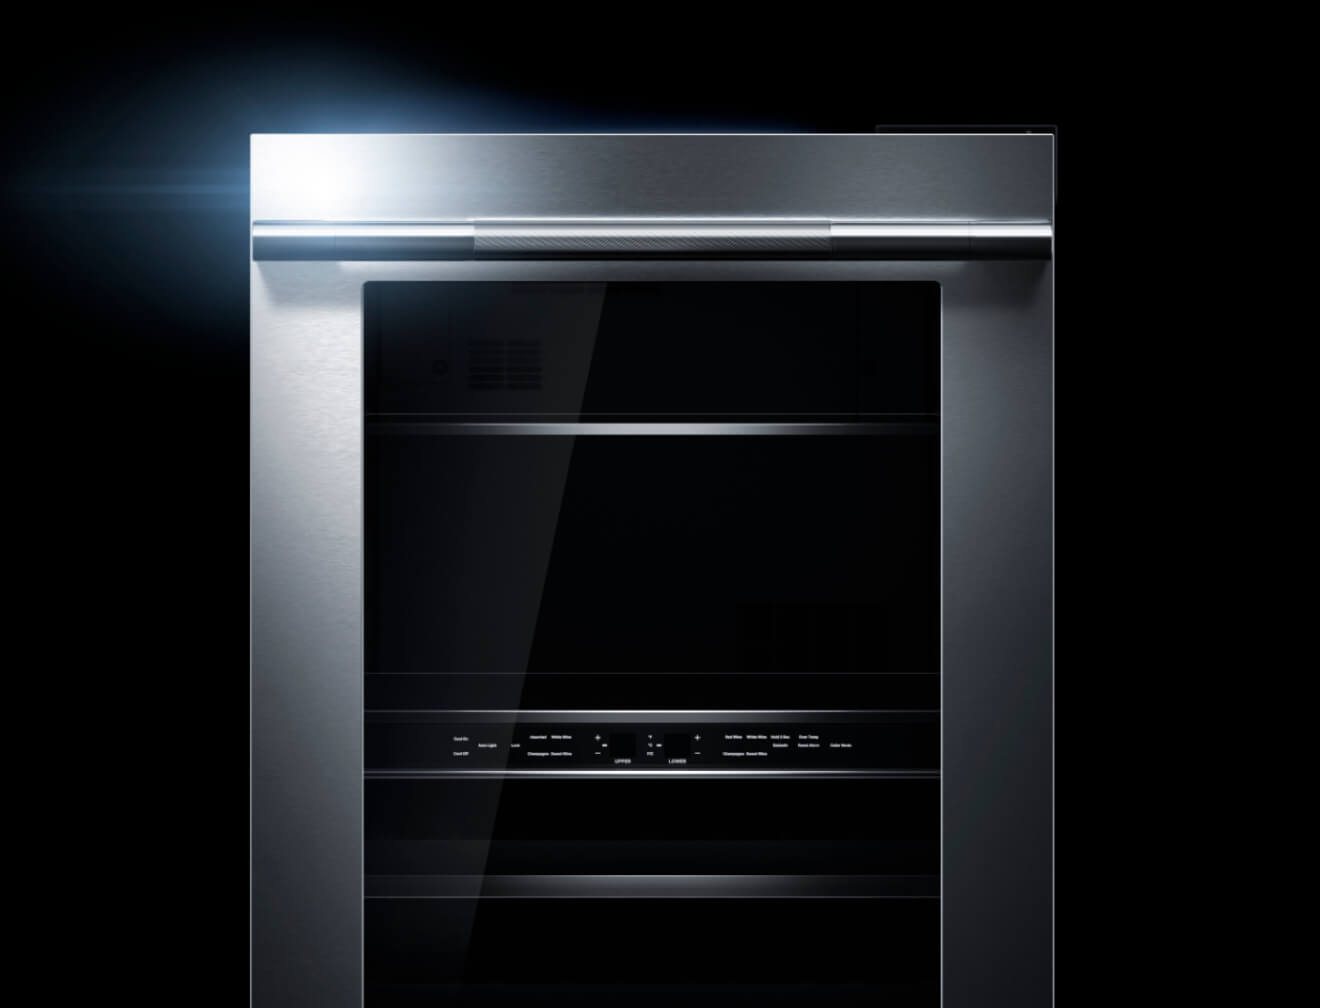 The top half of a glass-front undercounter refrigerator in the RISE™ Design Expression.